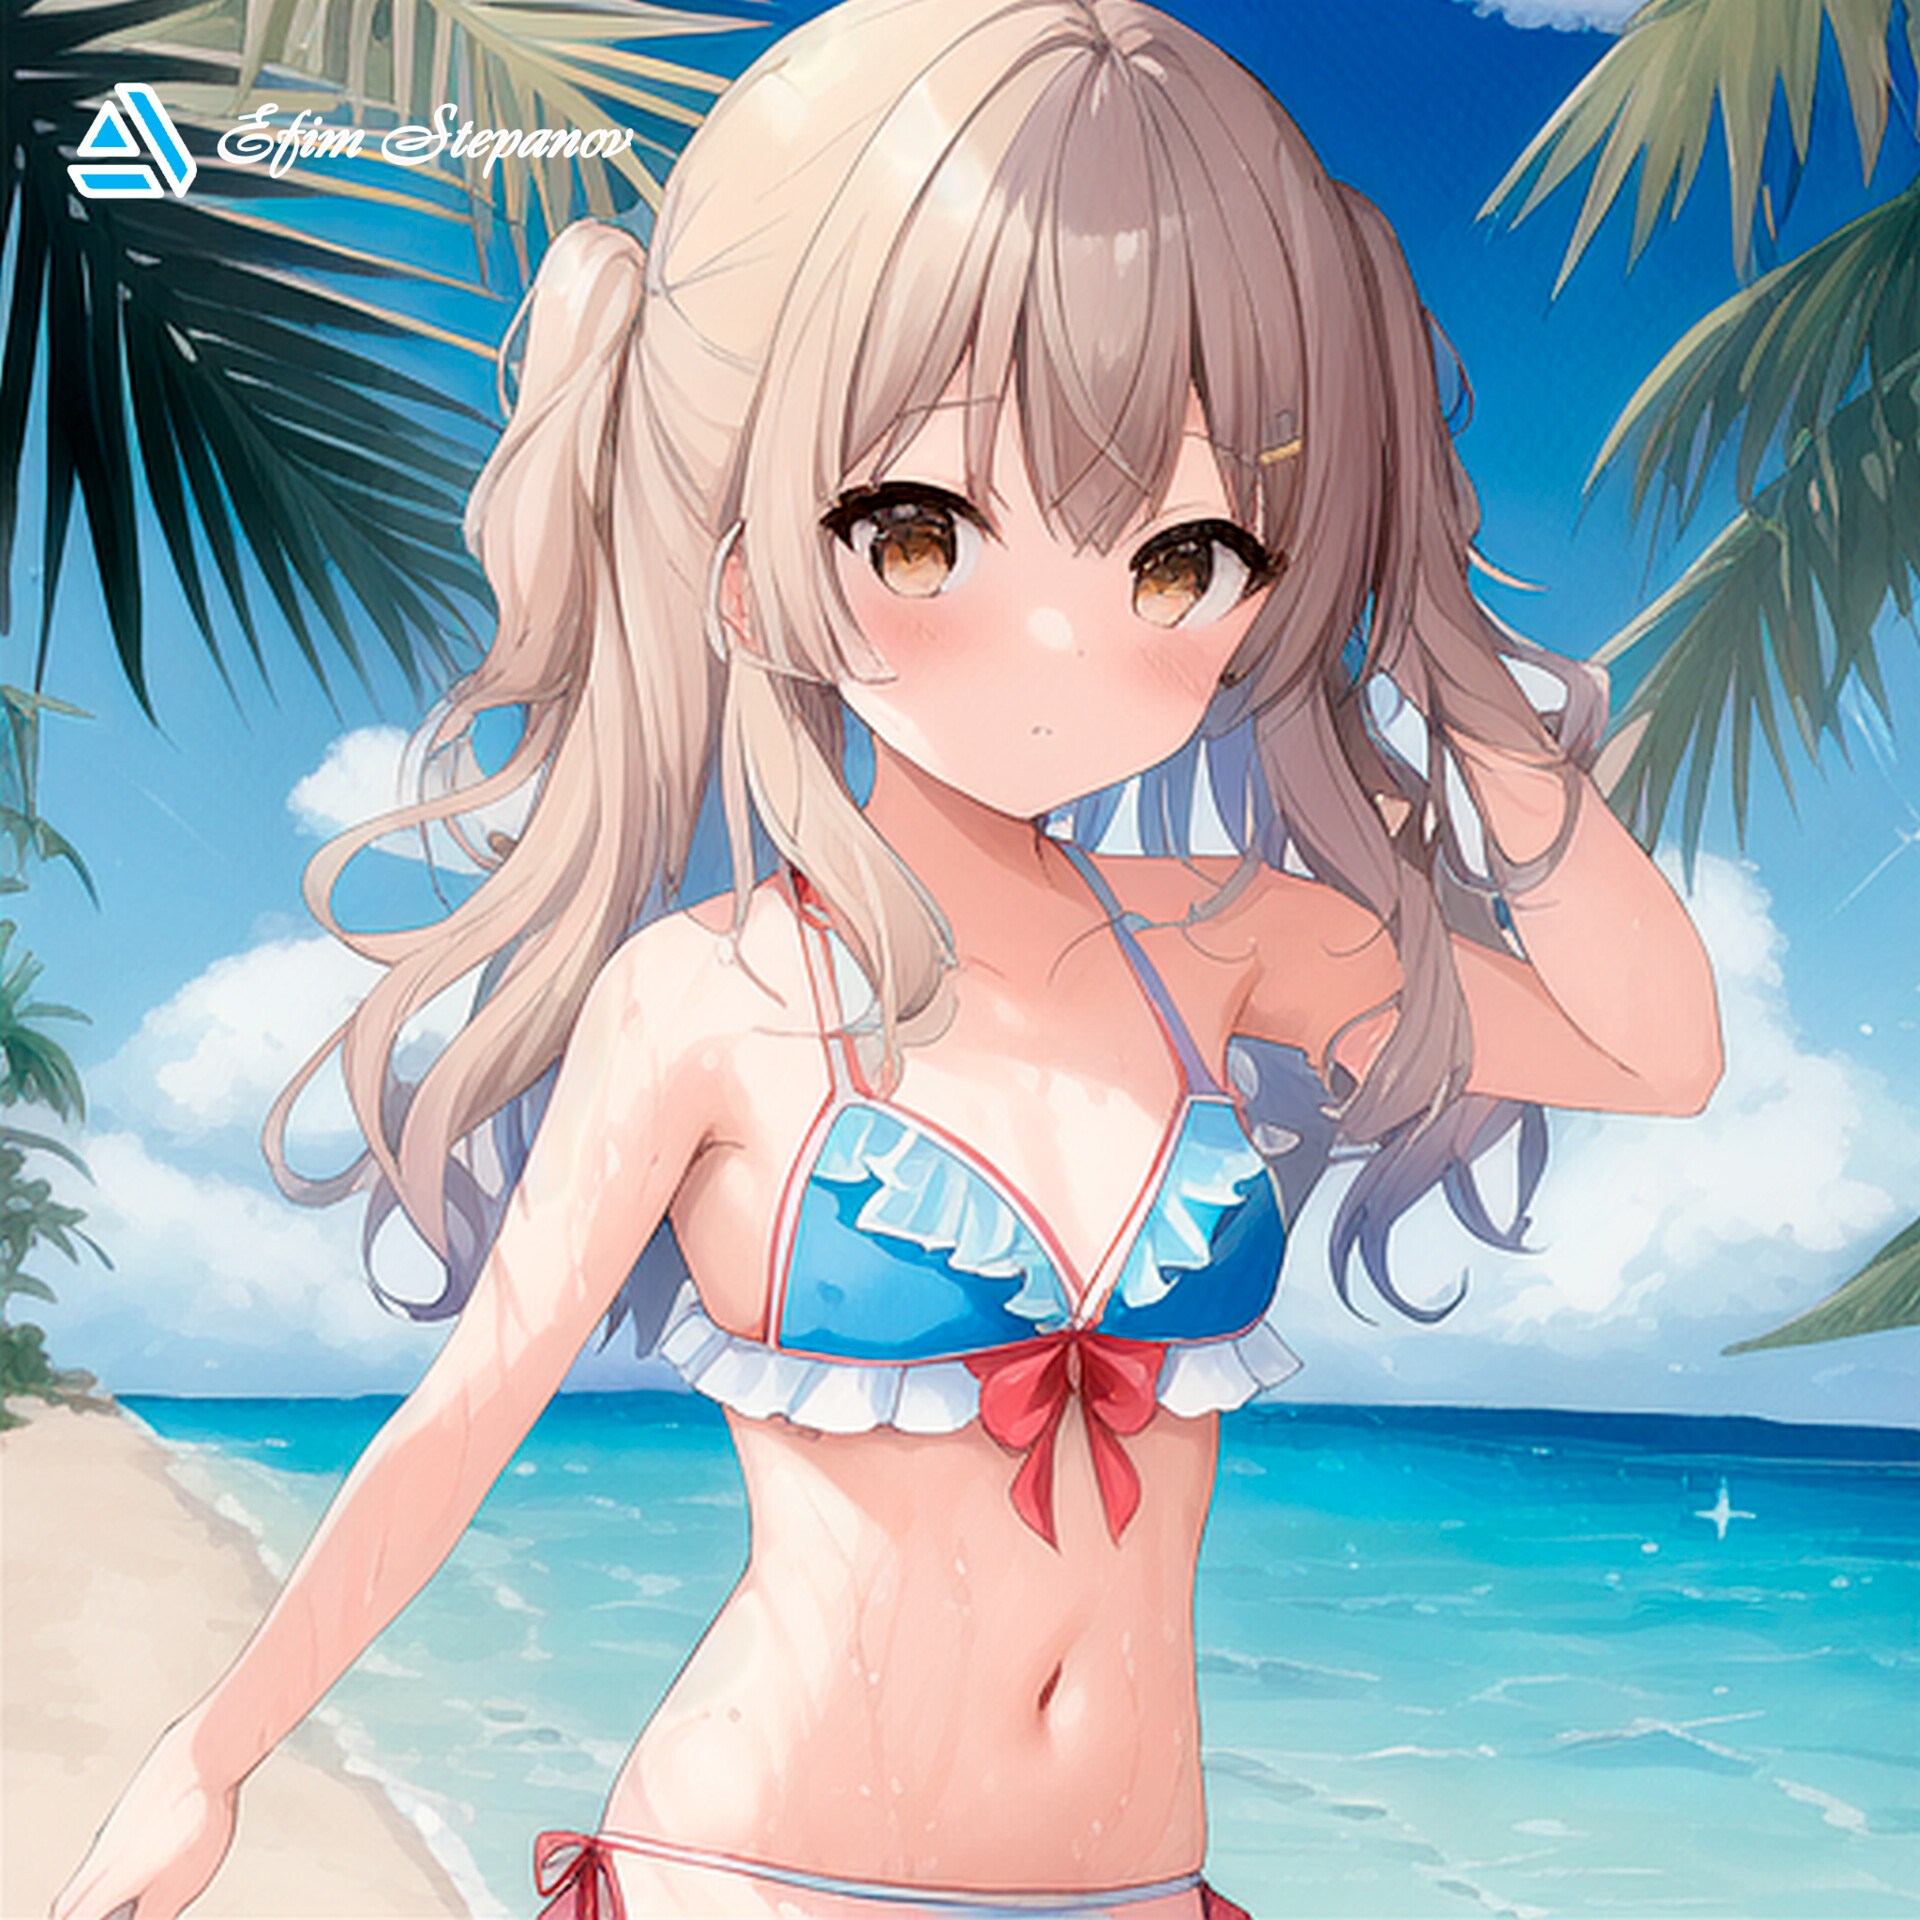 Anime Style Beach Background and Path by wbd on DeviantArt